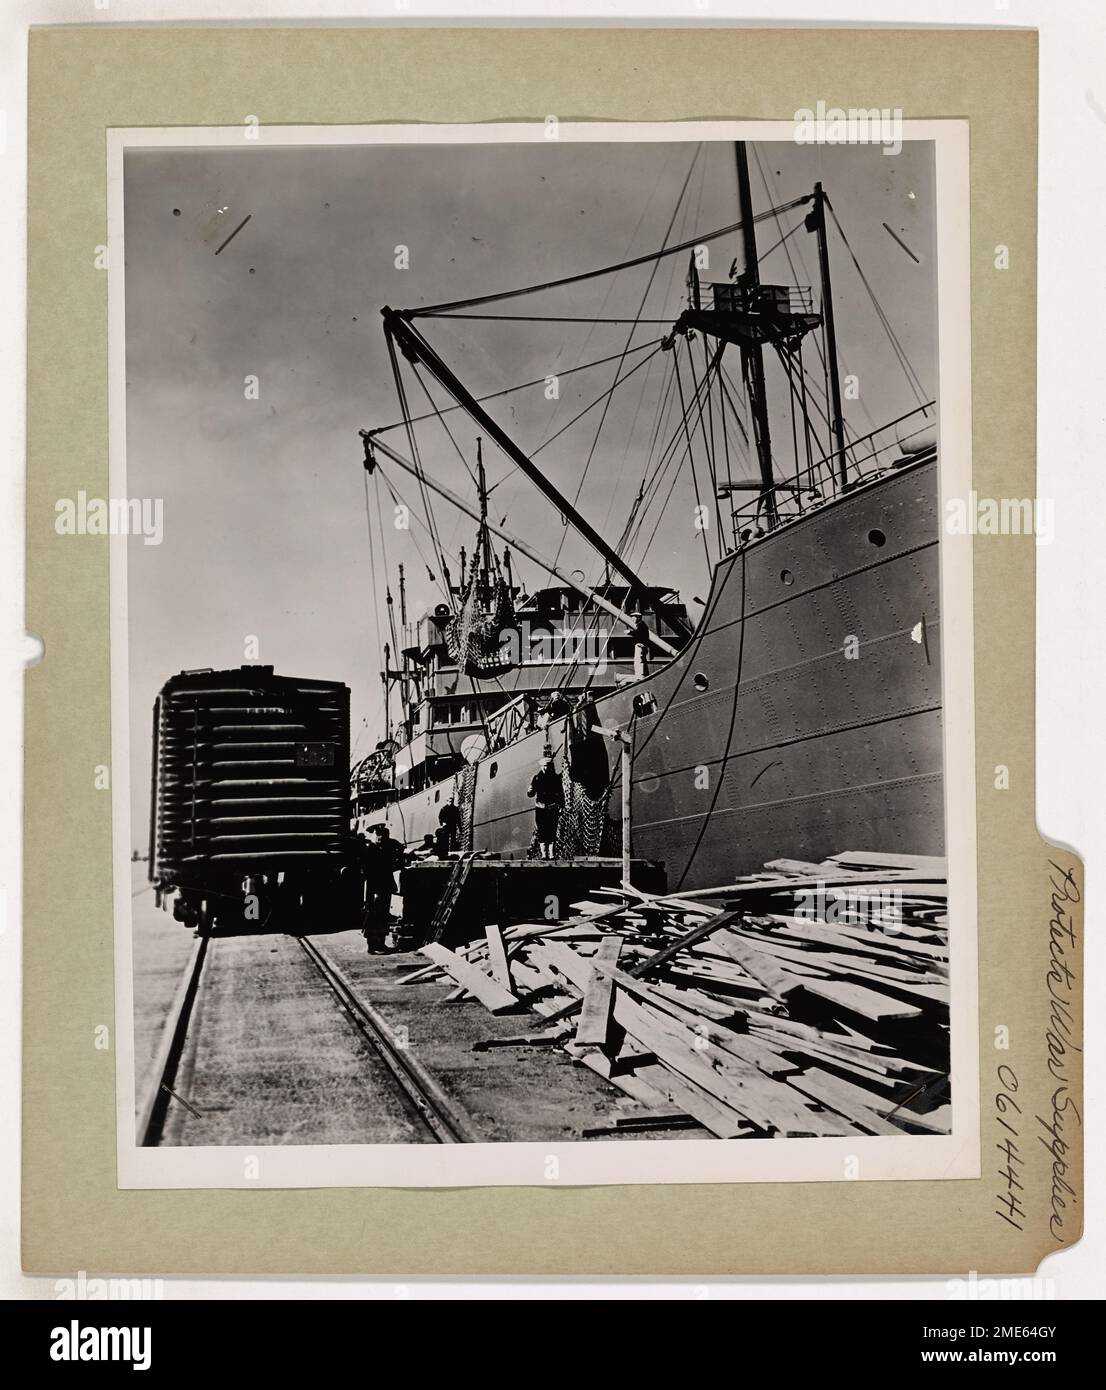 Coast Guard Protects War Supplies. War supplies bound for Allied troops on far flung shores around the world are loaded aboard a merchant ship under the watchful eyes of Coast Guard sentries. Stock Photo